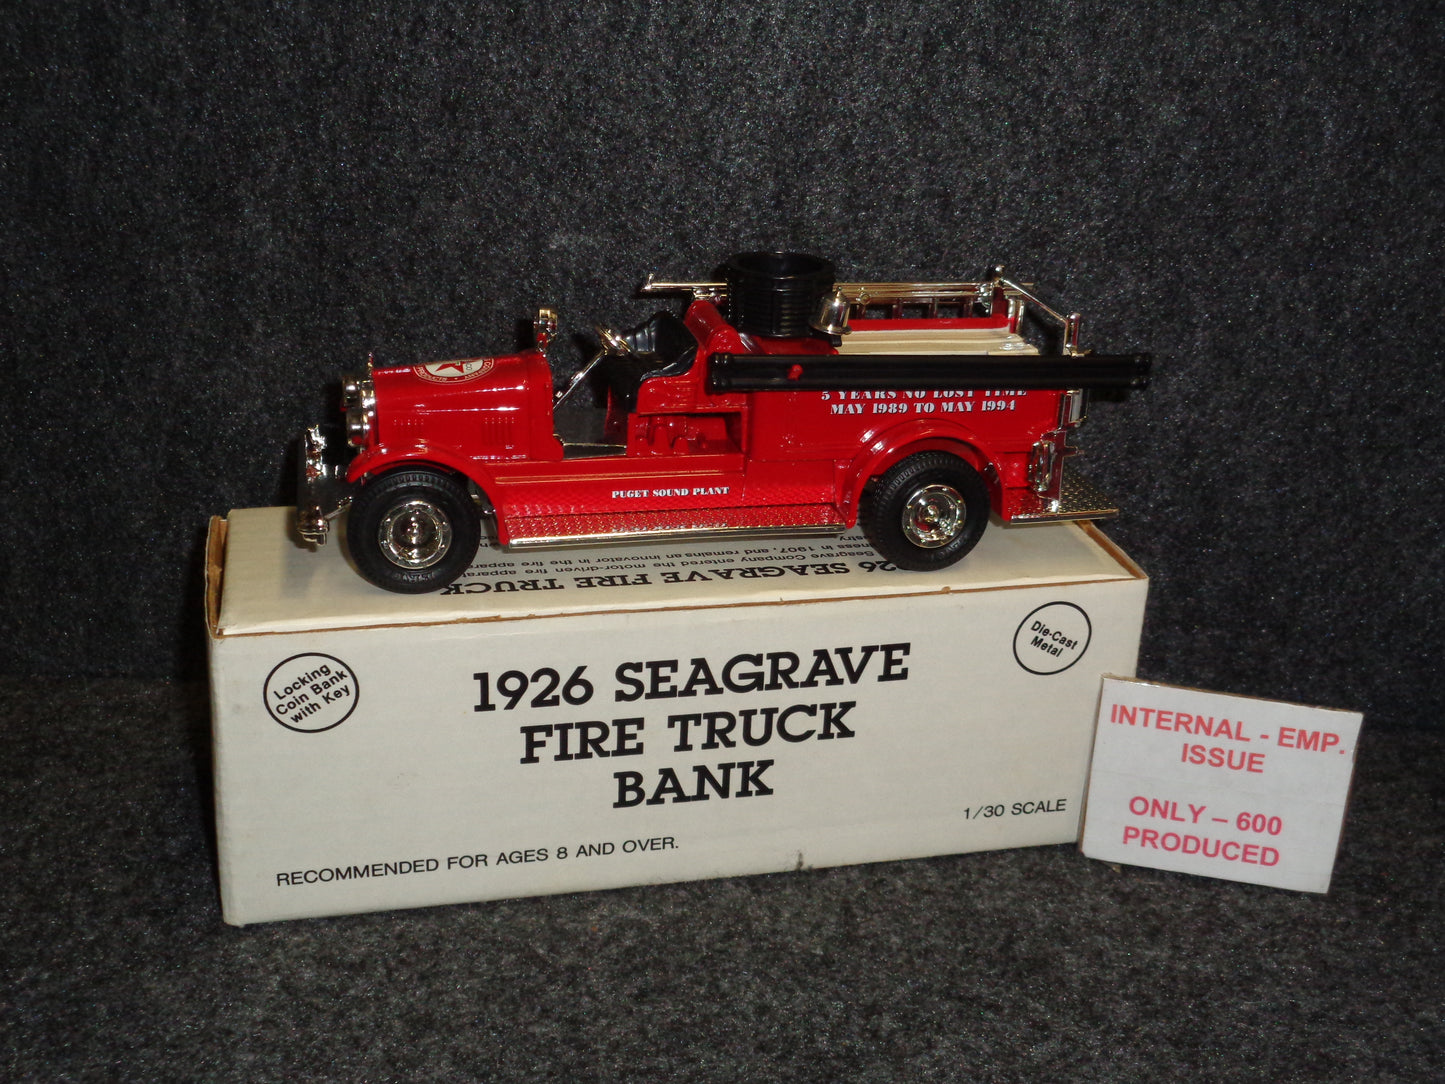 Texaco Puget Sound Plant 1926 Seagrave Fire Truck